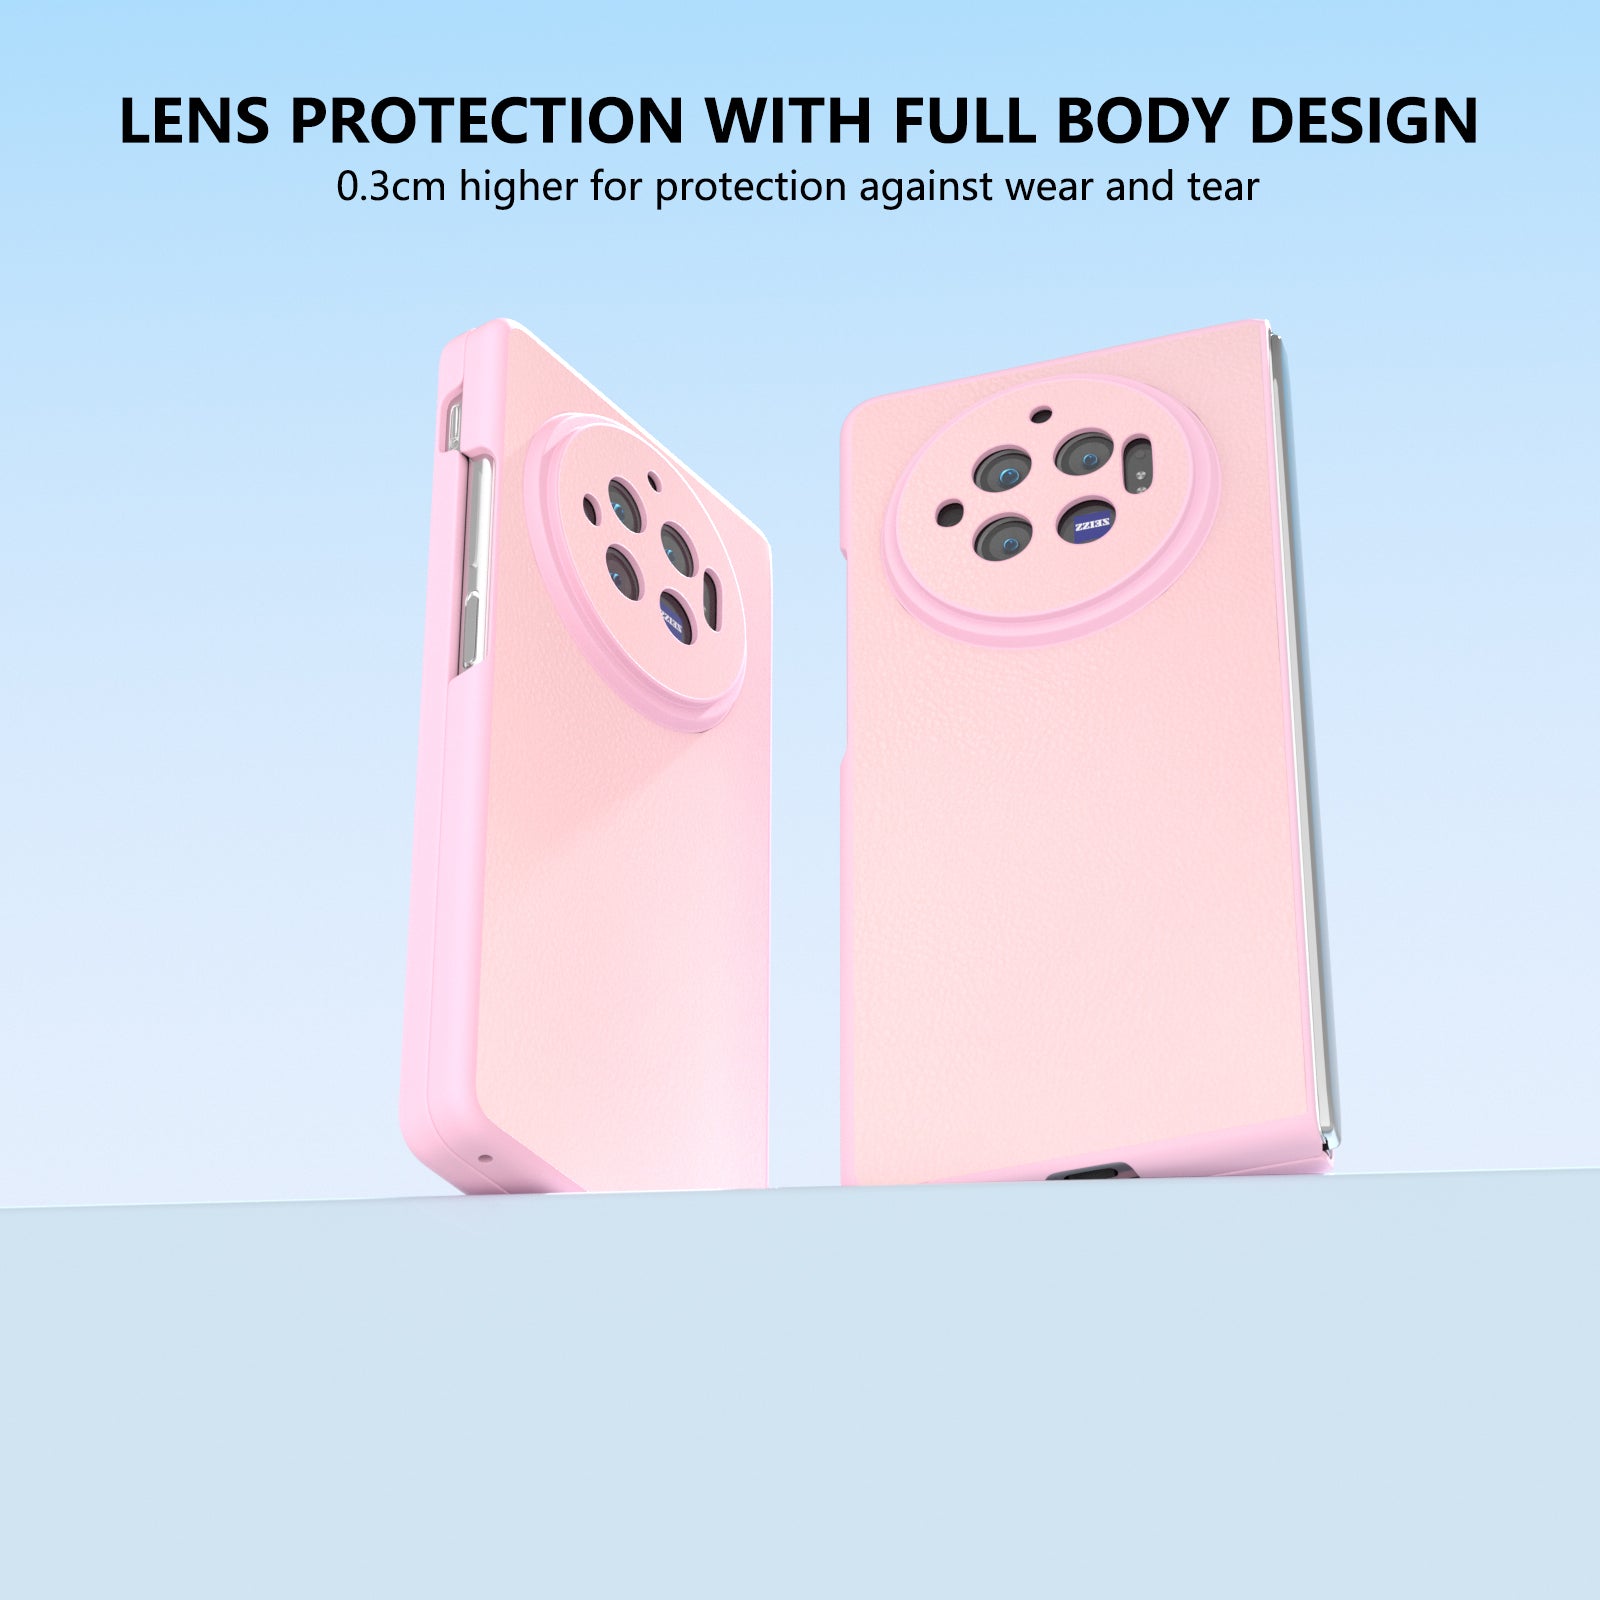 For vivo X Fold3 Case PU Leather Coated Hard PC Folding Phone Cover - Pink